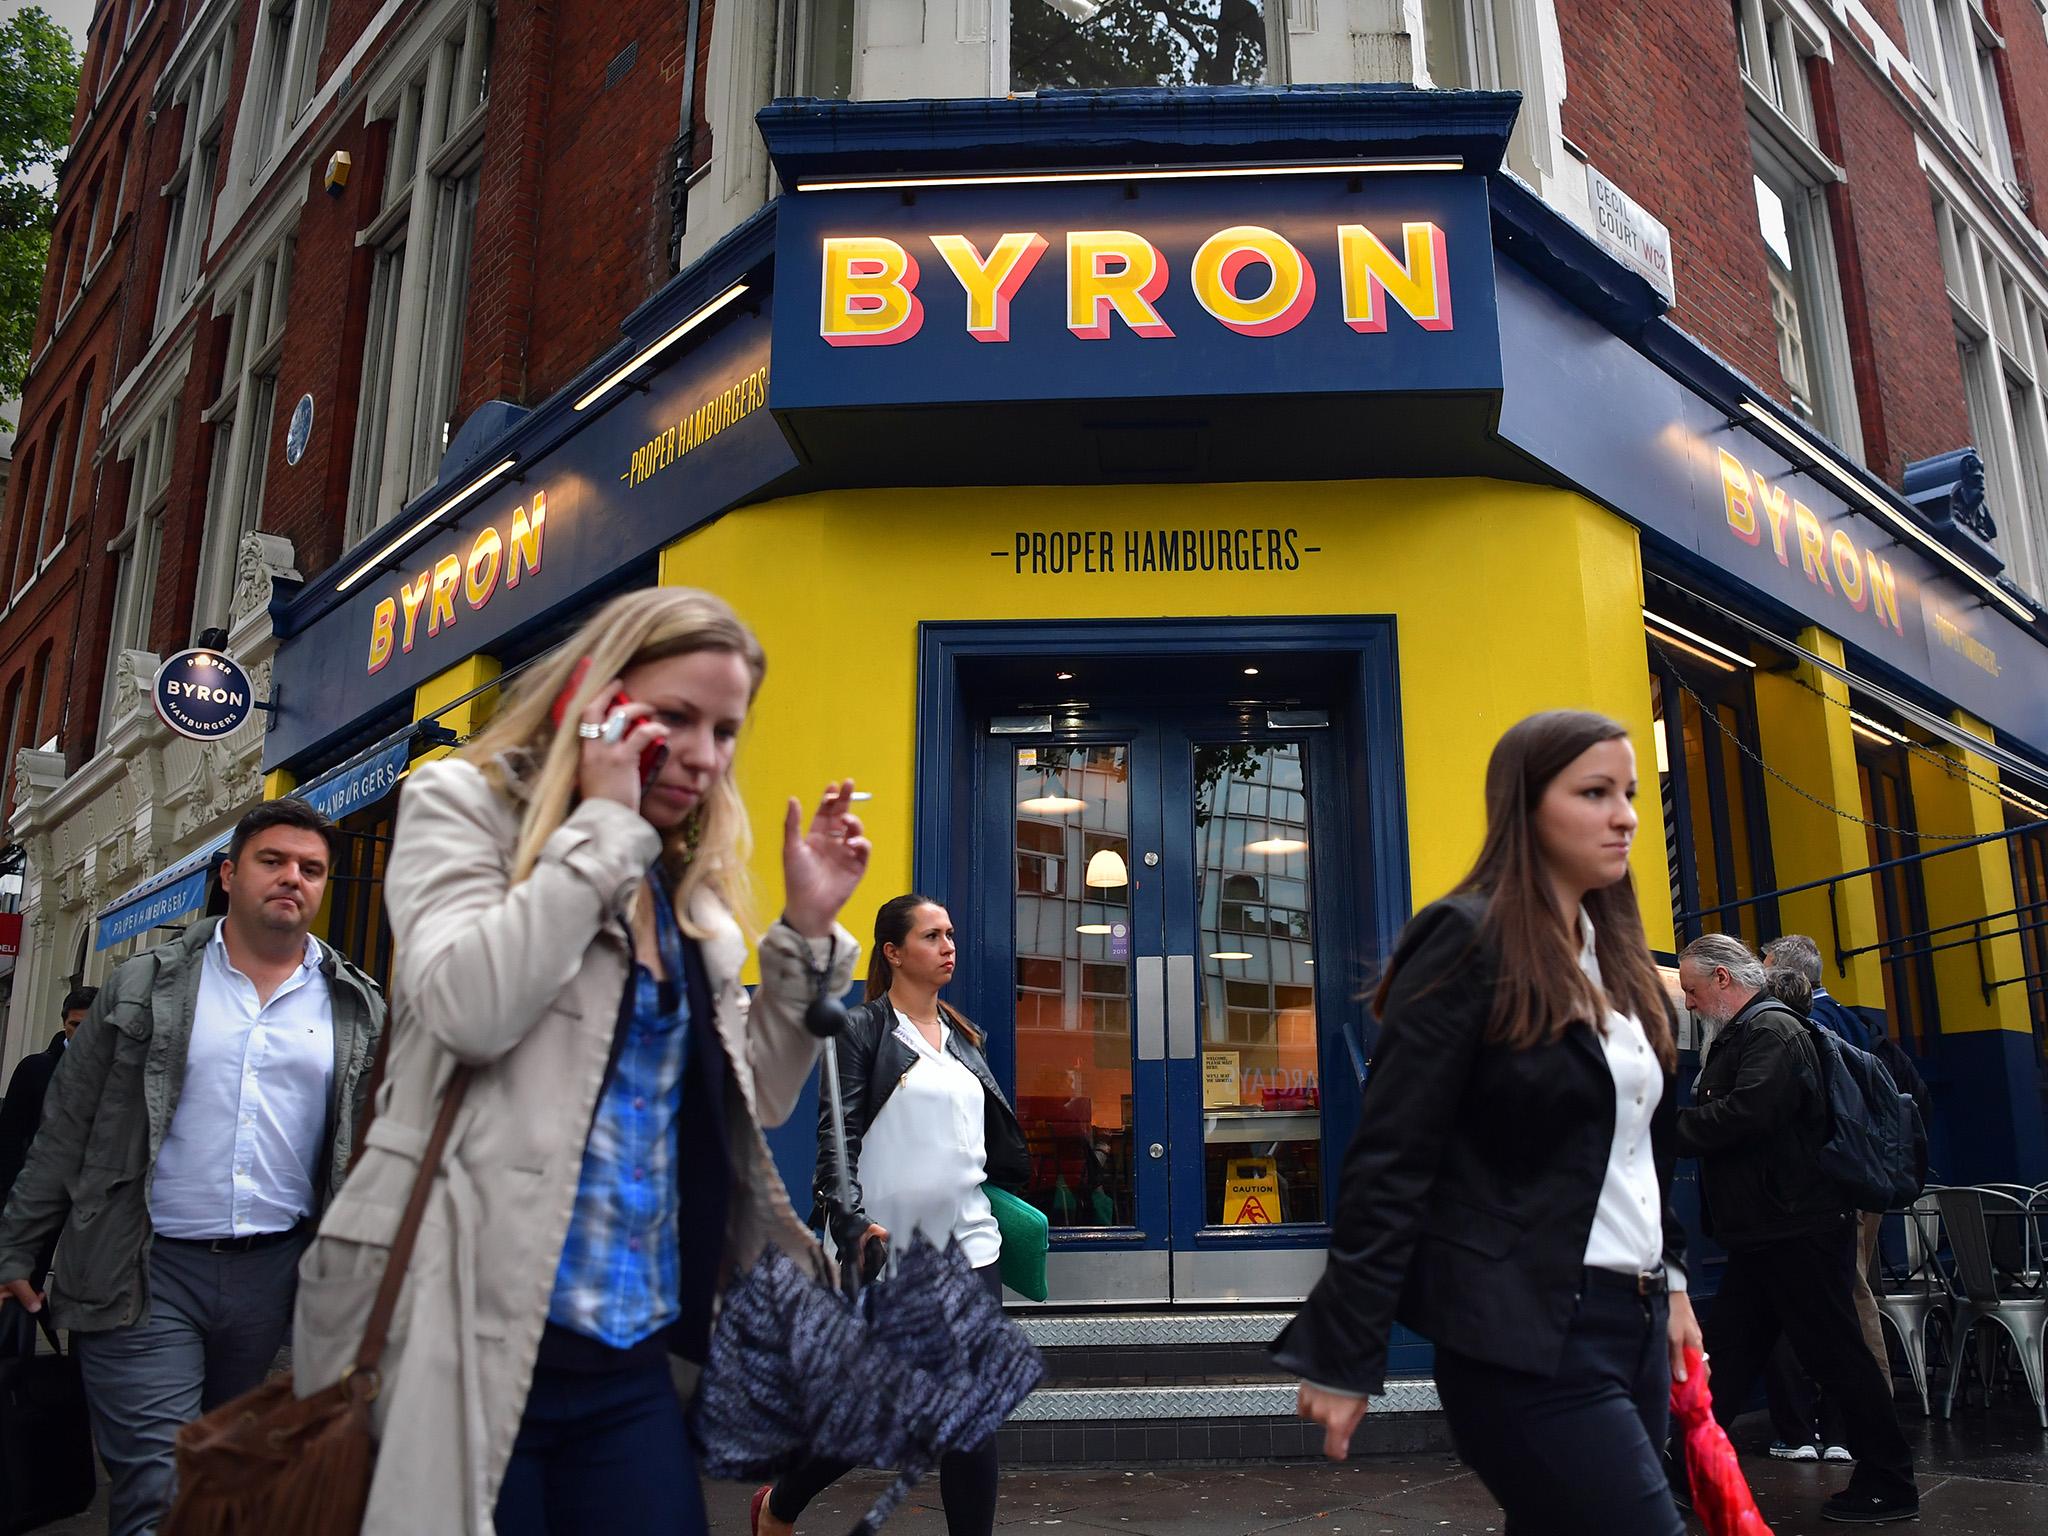 Since consumers’ demands have changed, Byron has been forced to slim down its business